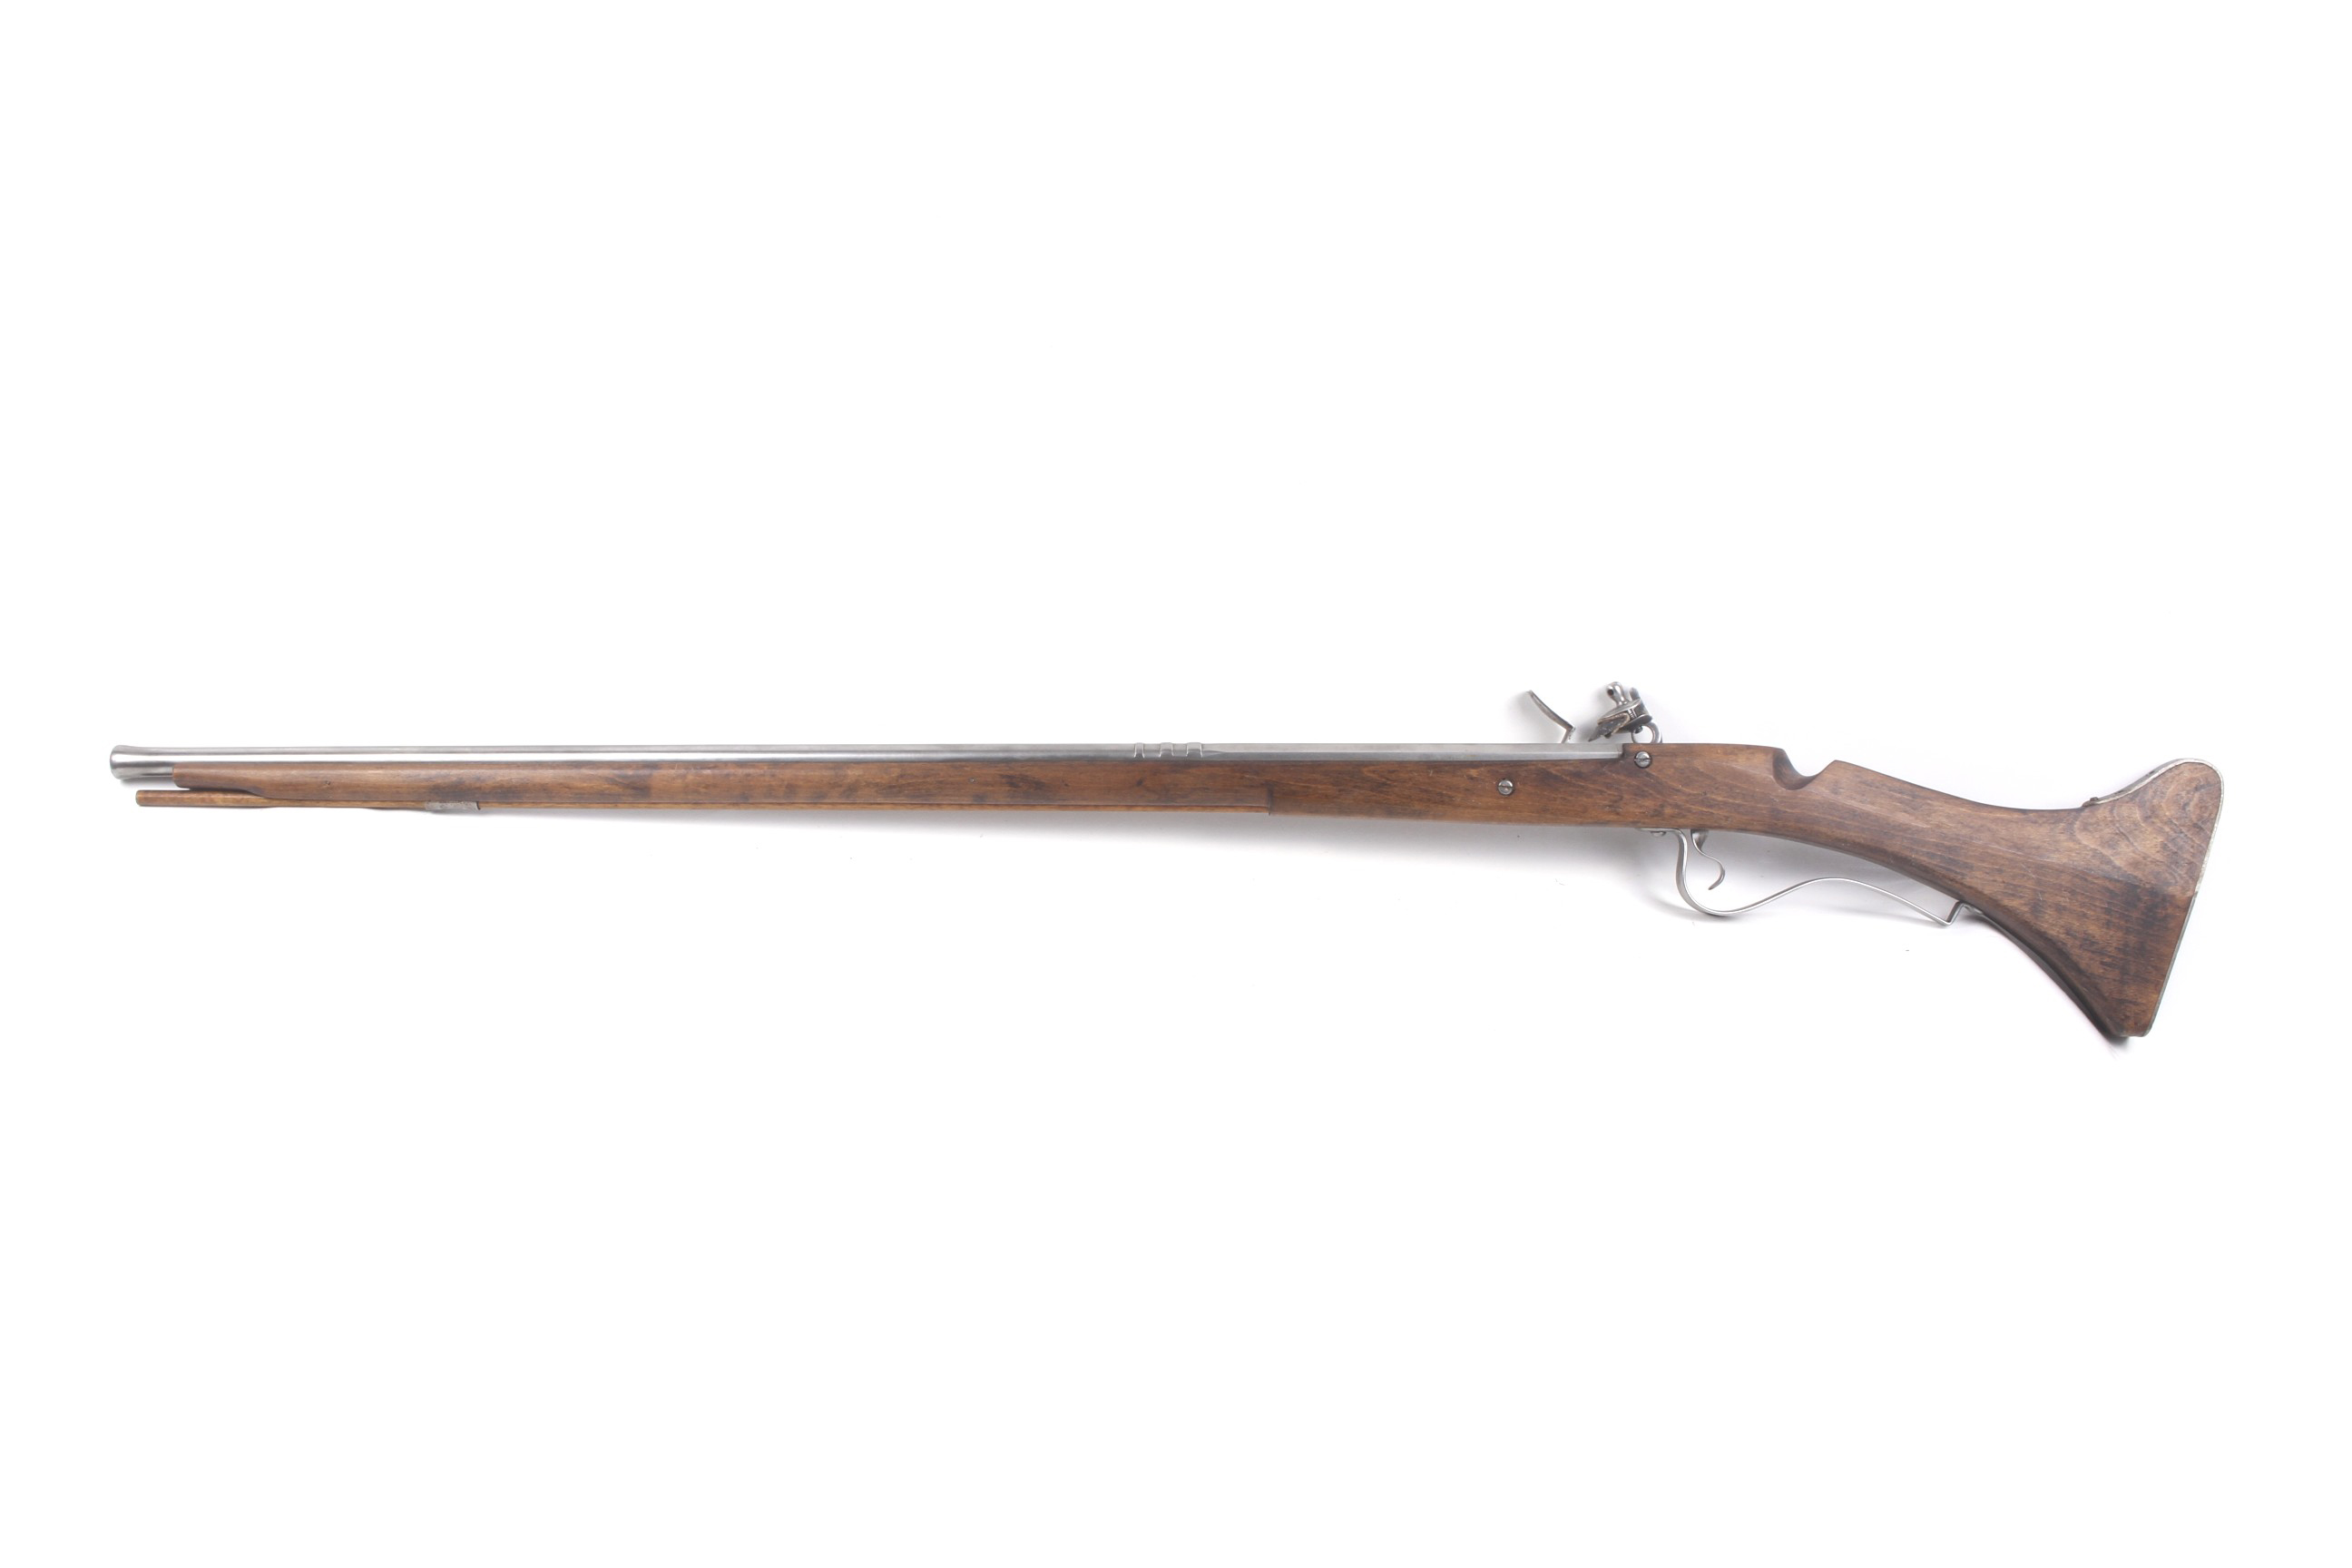 A shootable reproduction of a circa 1700 English lock muzzle loading musket. - Image 2 of 3